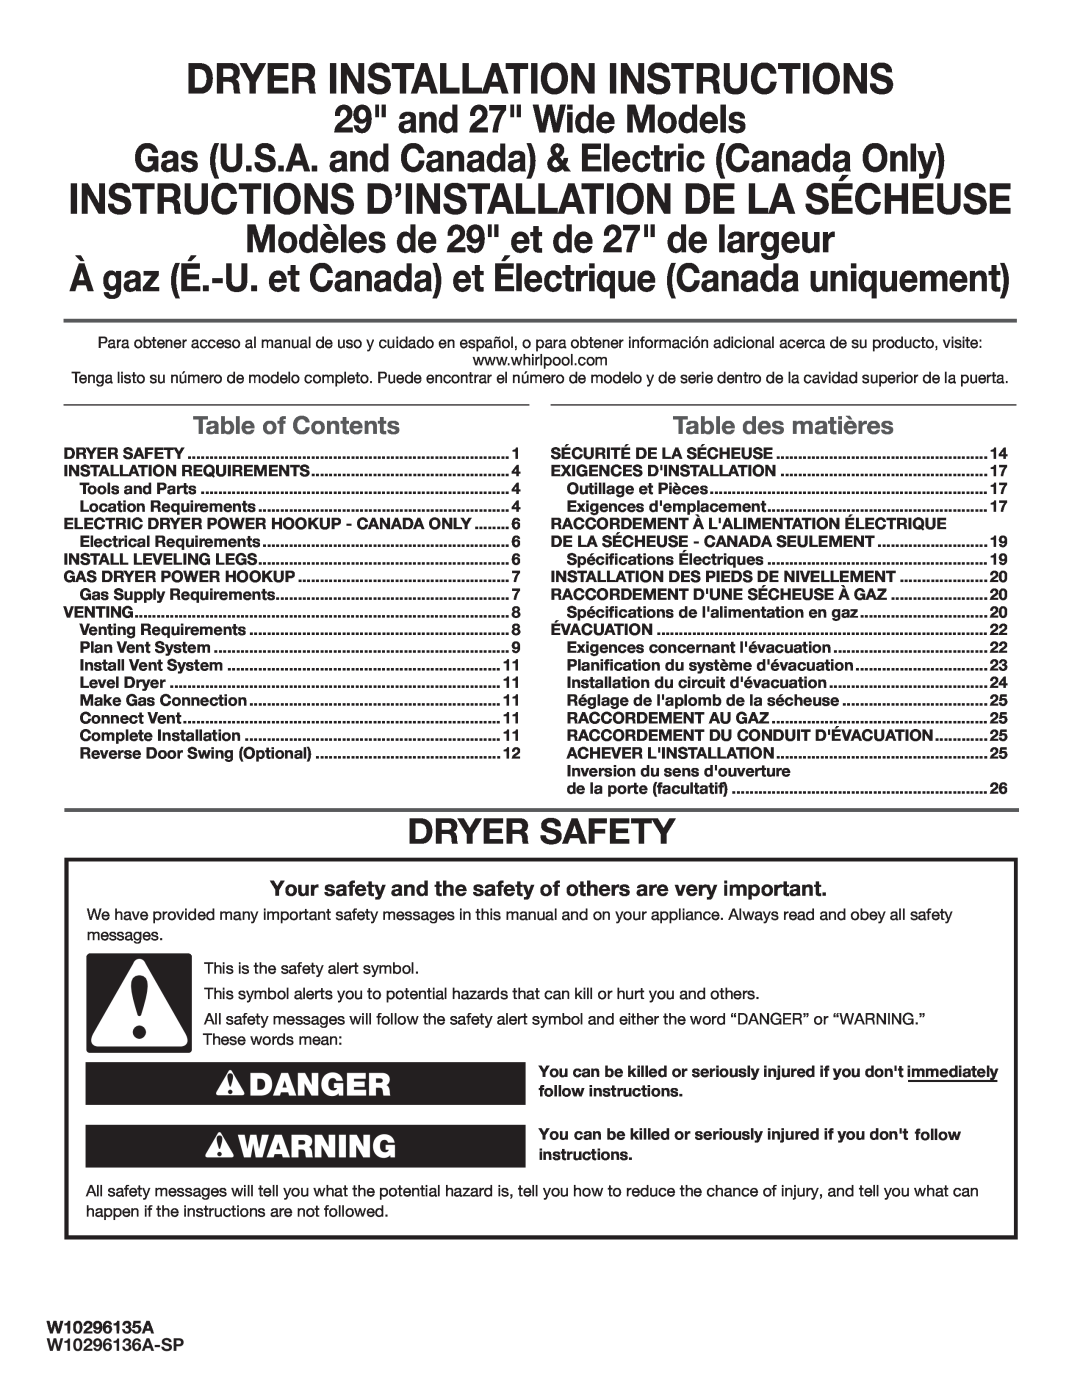 Maytag W10296135A, MGDC500VW installation instructions Dryer Safety, Danger Warning, Table of Contents, Table des matières 